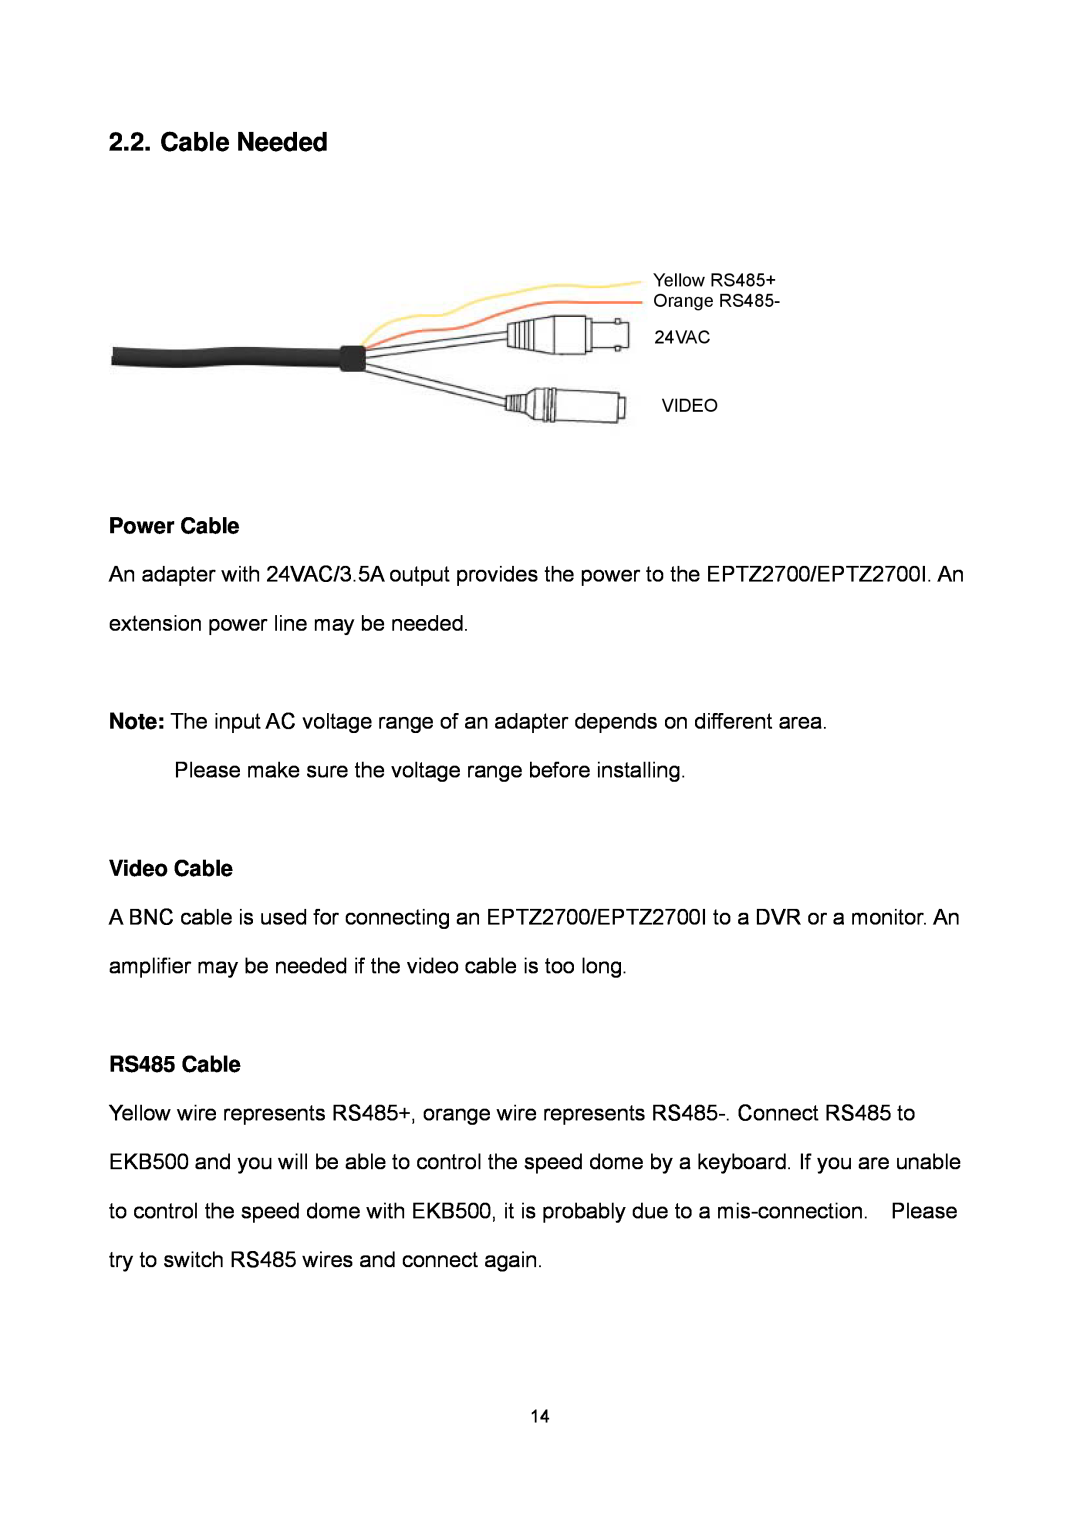 EverFocus EPTZ2700i user manual Cable Needed, Power Cable, Video Cable, RS485 Cable 